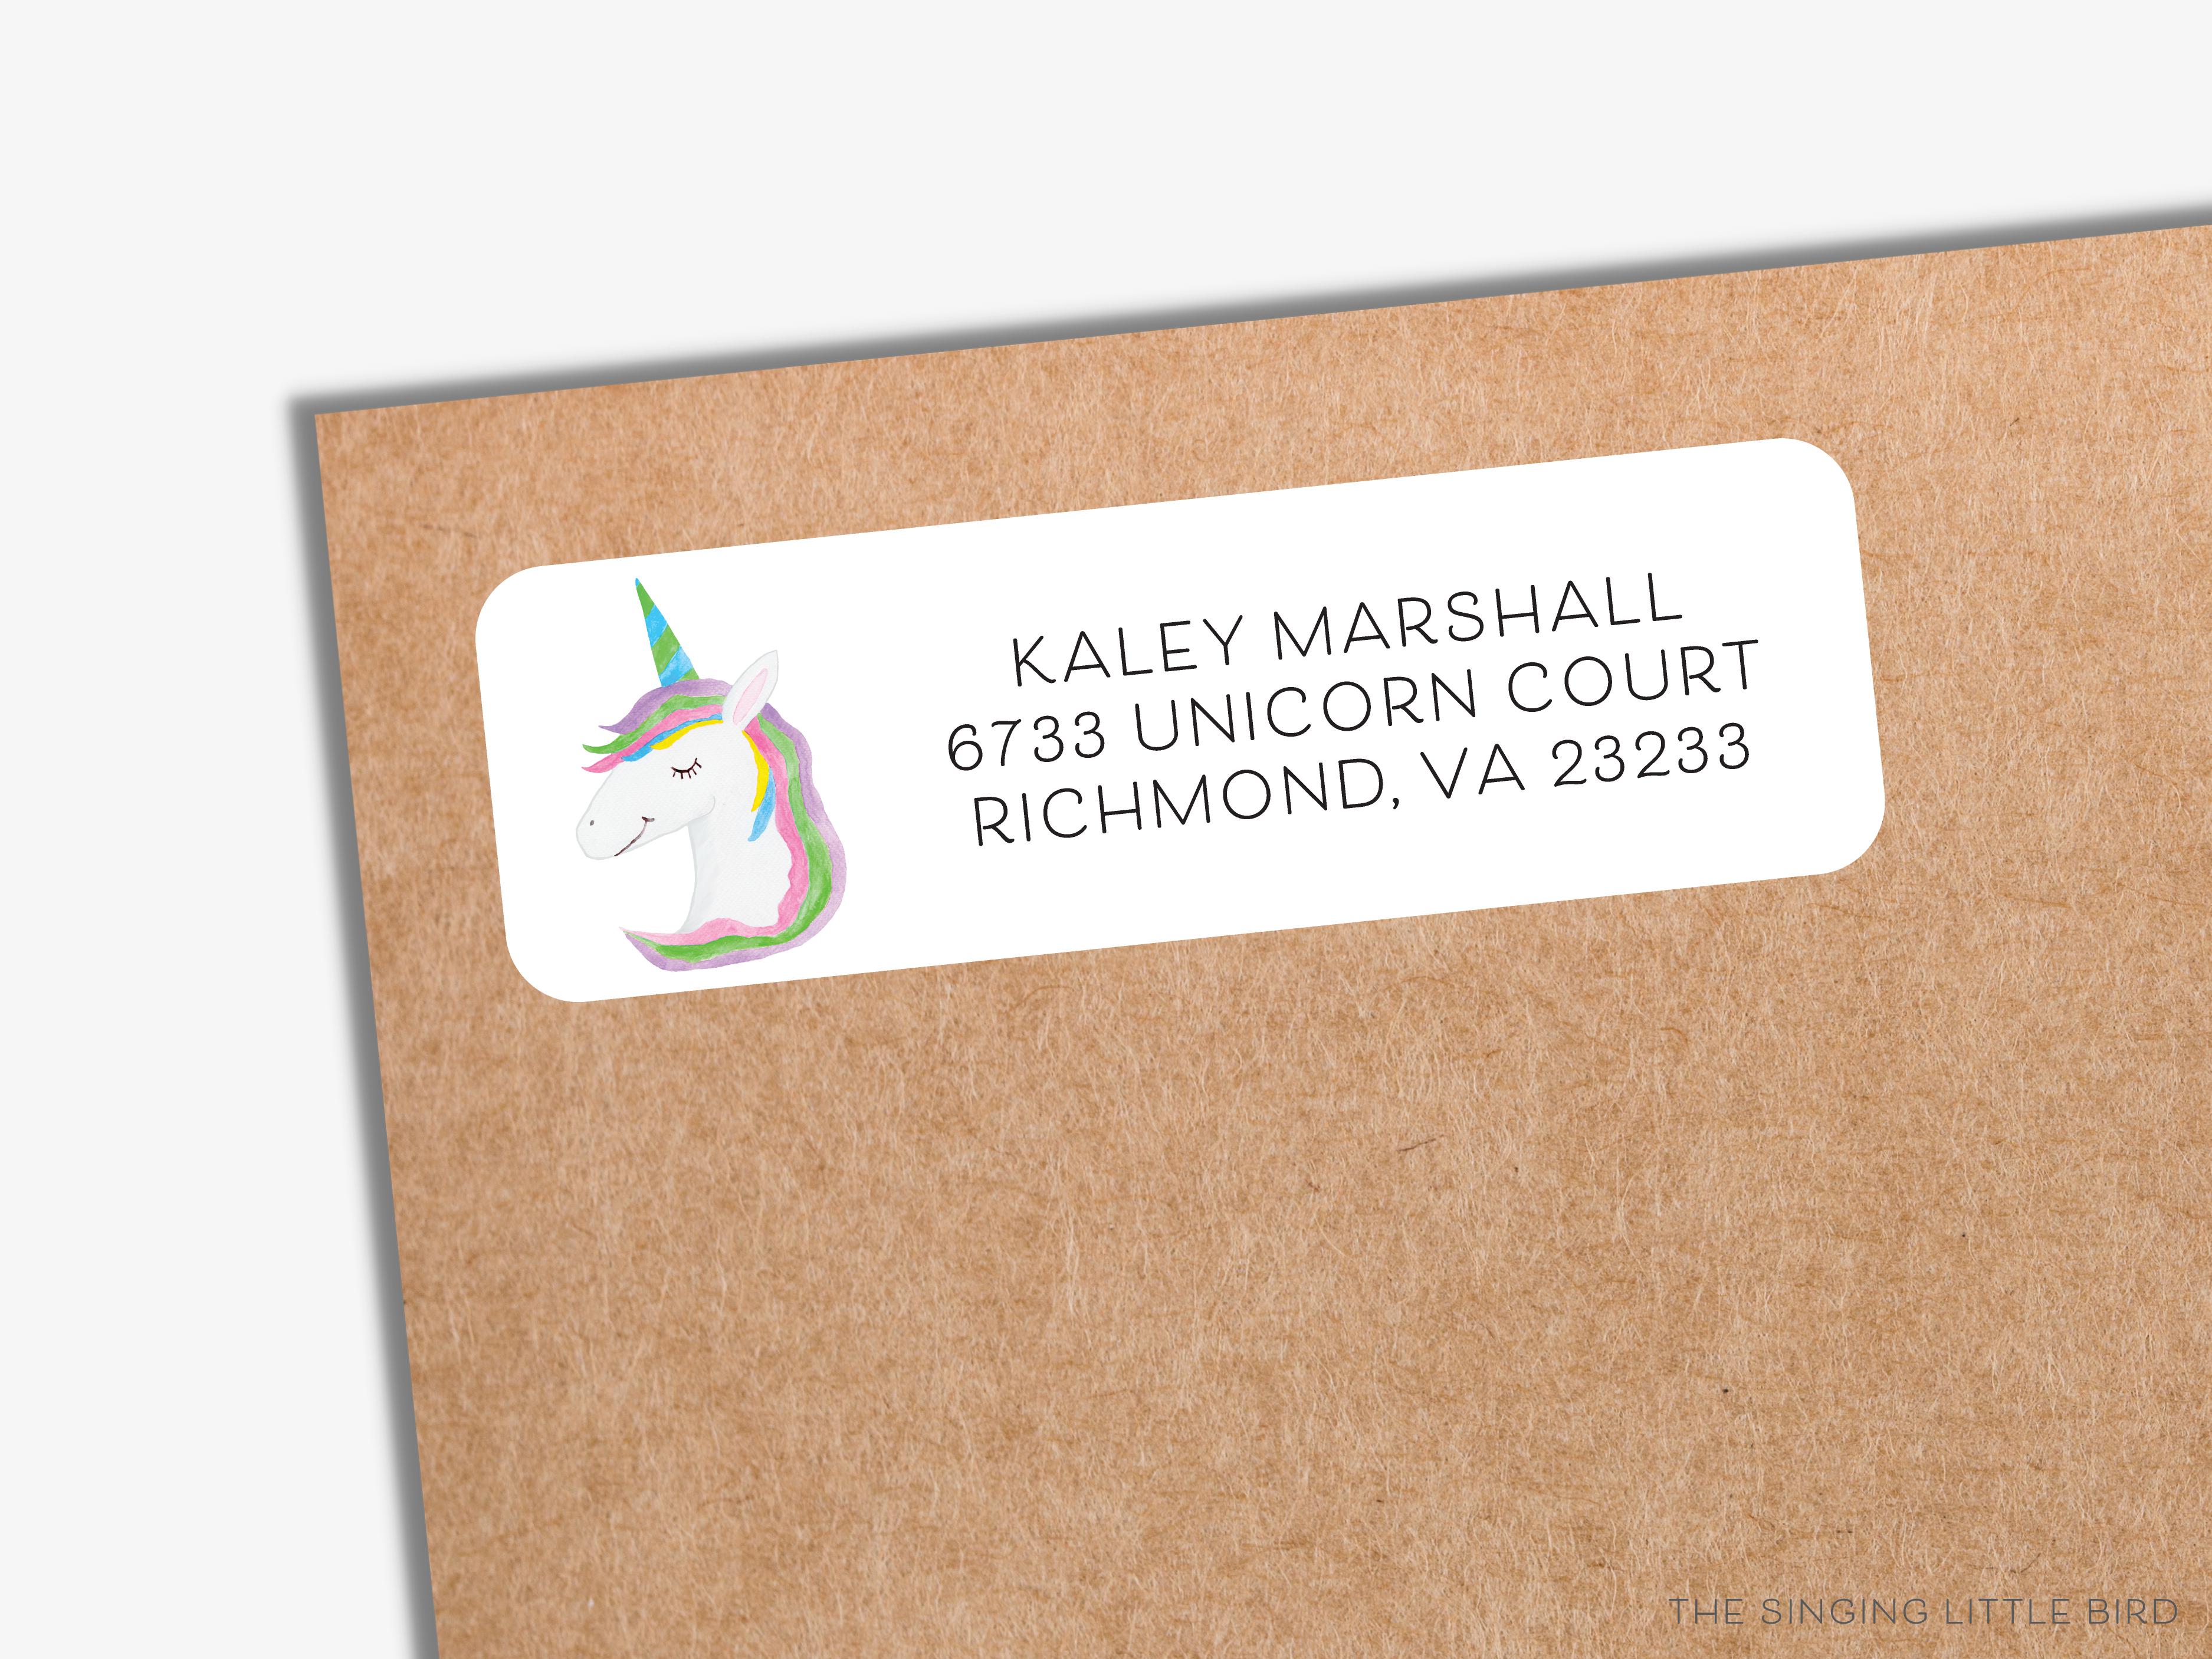 Unicorn Return Address Labels-These personalized return address labels are 2.625" x 1" and feature our hand-painted watercolor unicorn, printed in the USA on beautiful matte finish labels. These make gifts for yourself or the make-believe lover. -The Singing Little Bird